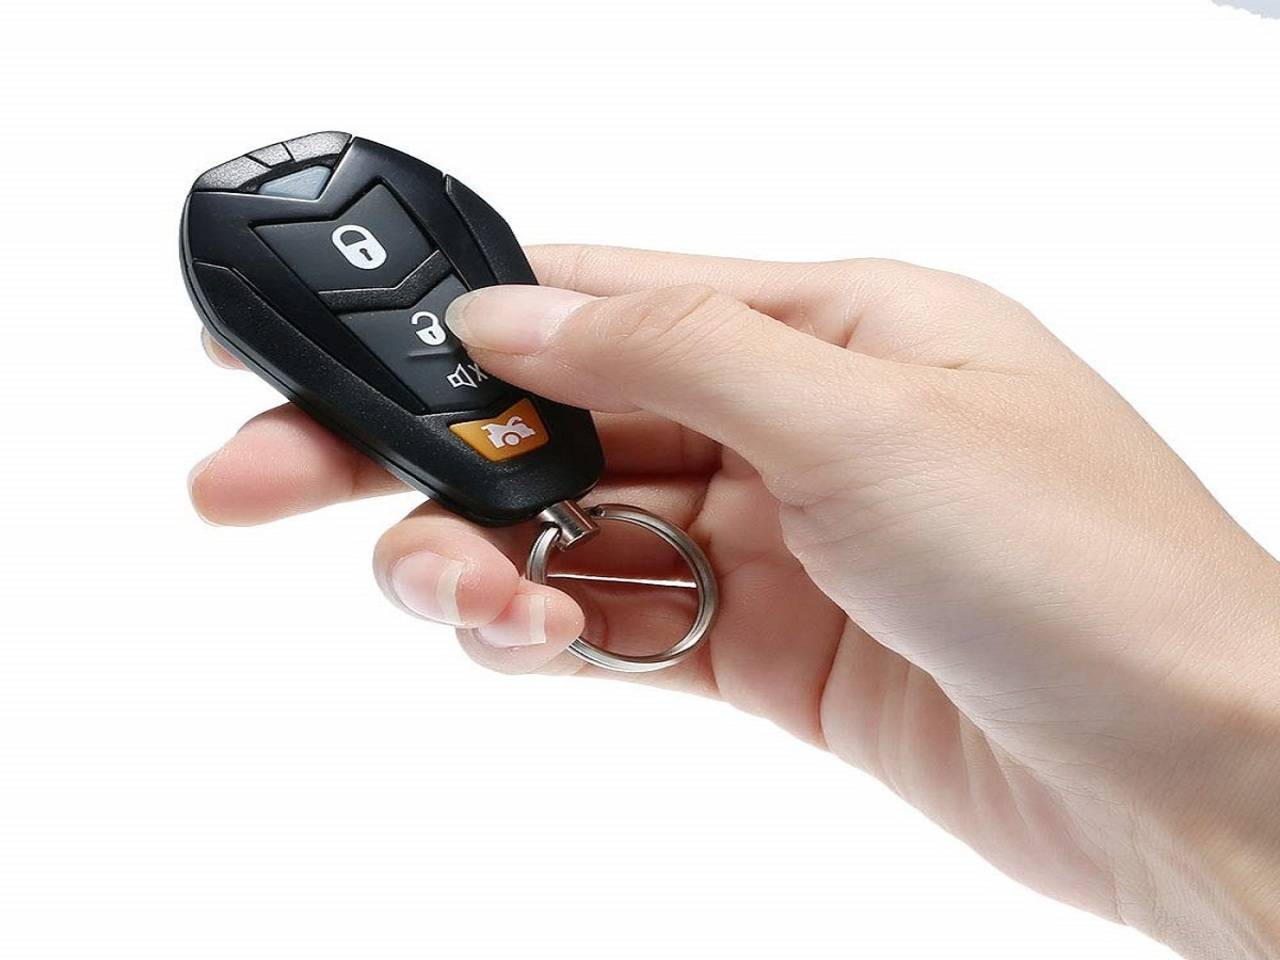 How To Buy And Install A Remote Keyless Entry System In Your Car?